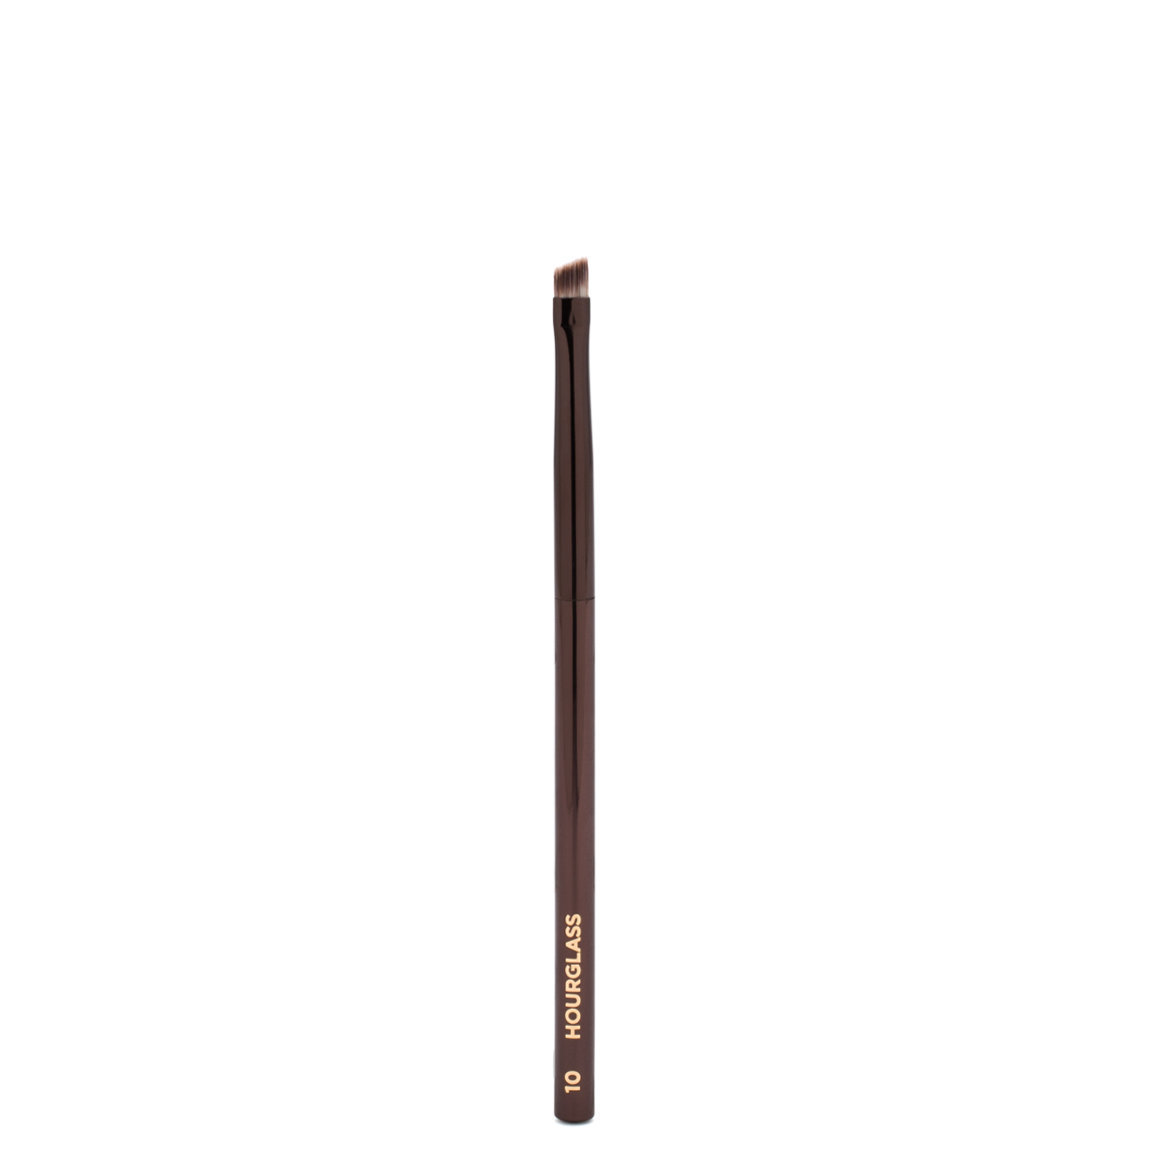 Hourglass N° 10 Angled Liner Brush alternative view 1 - product swatch.